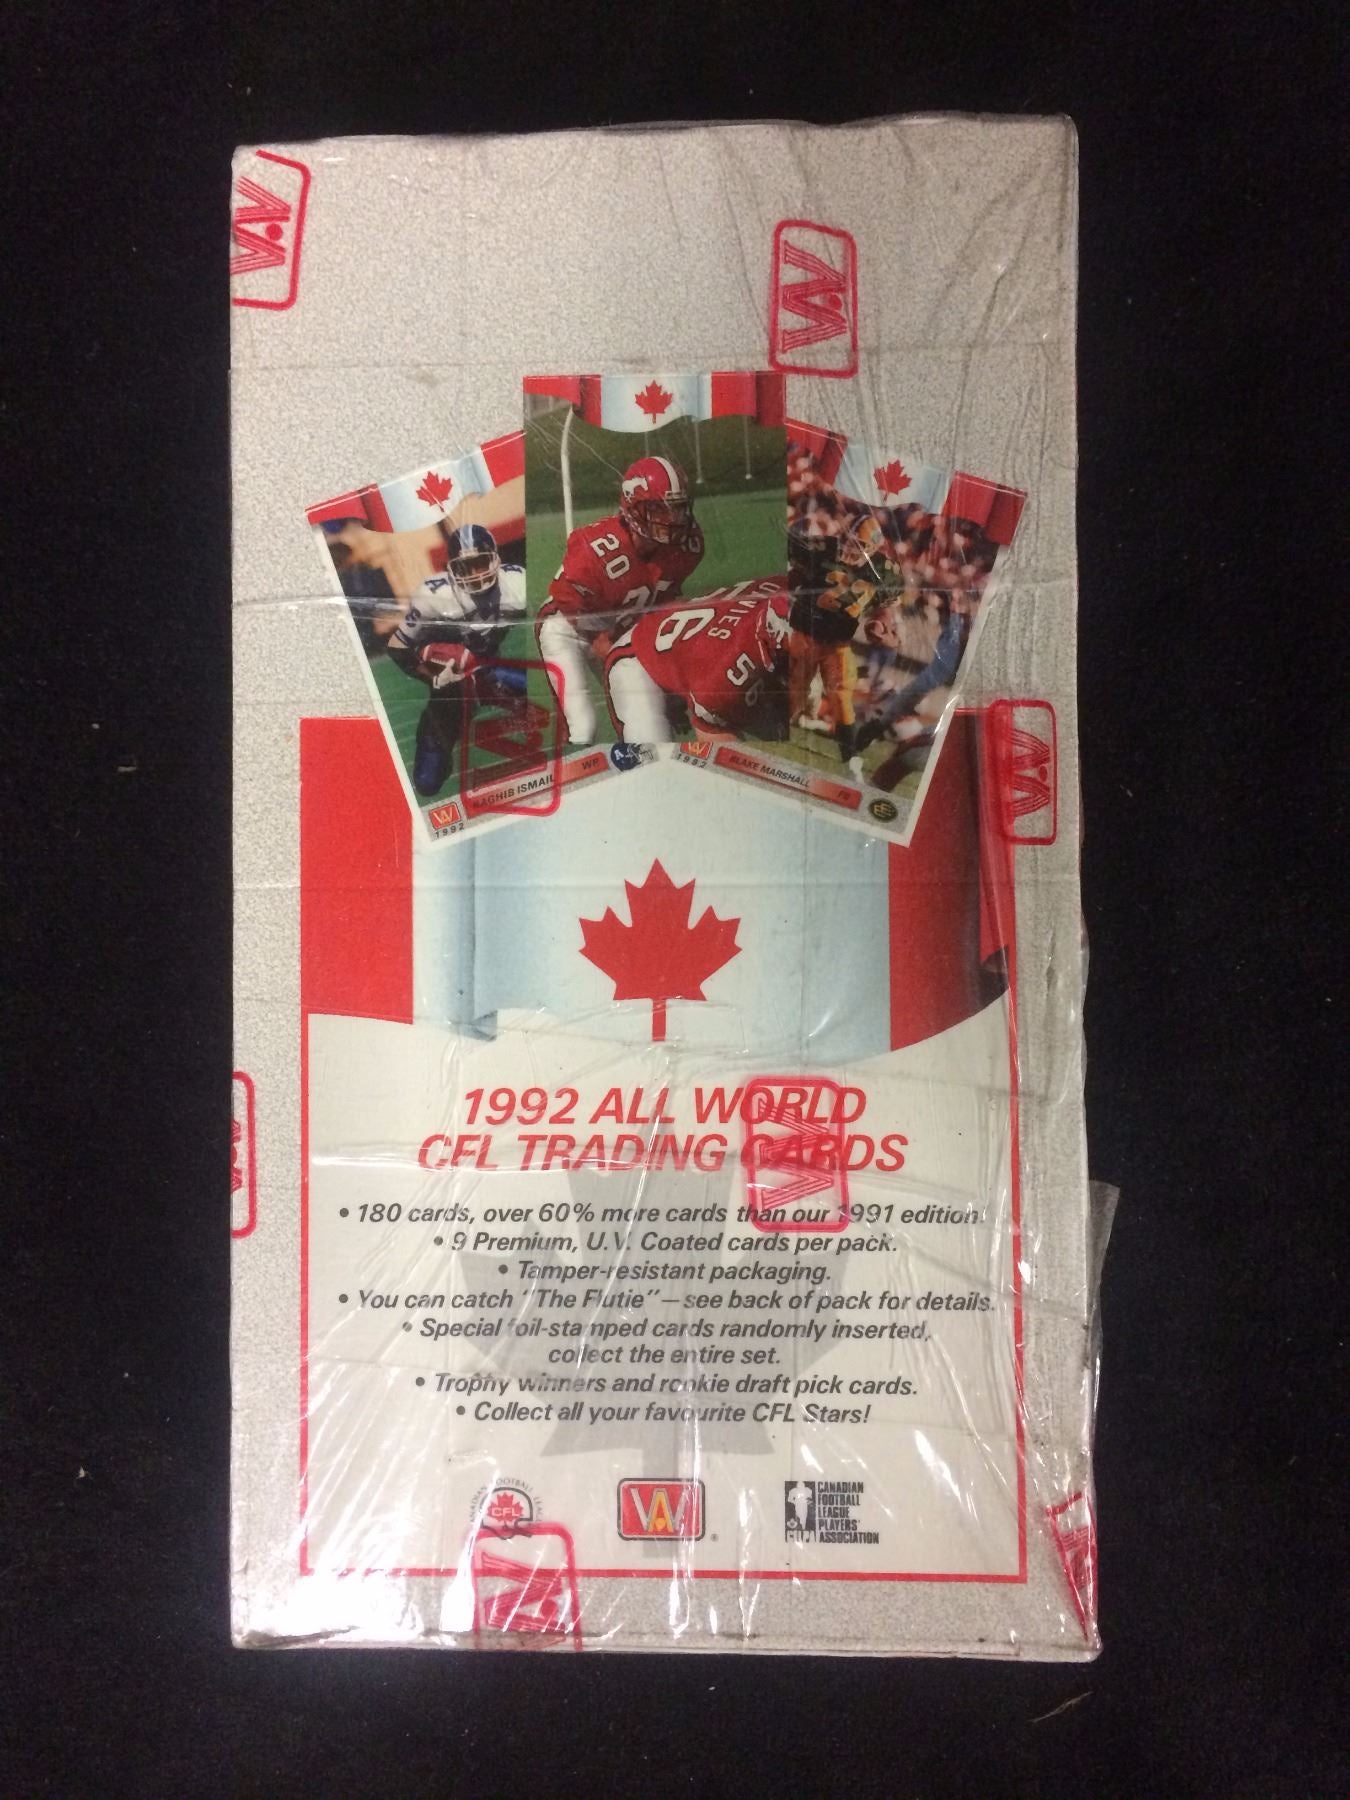 1992 All World CFL Trading Cards Box | Eastridge Sports Cards